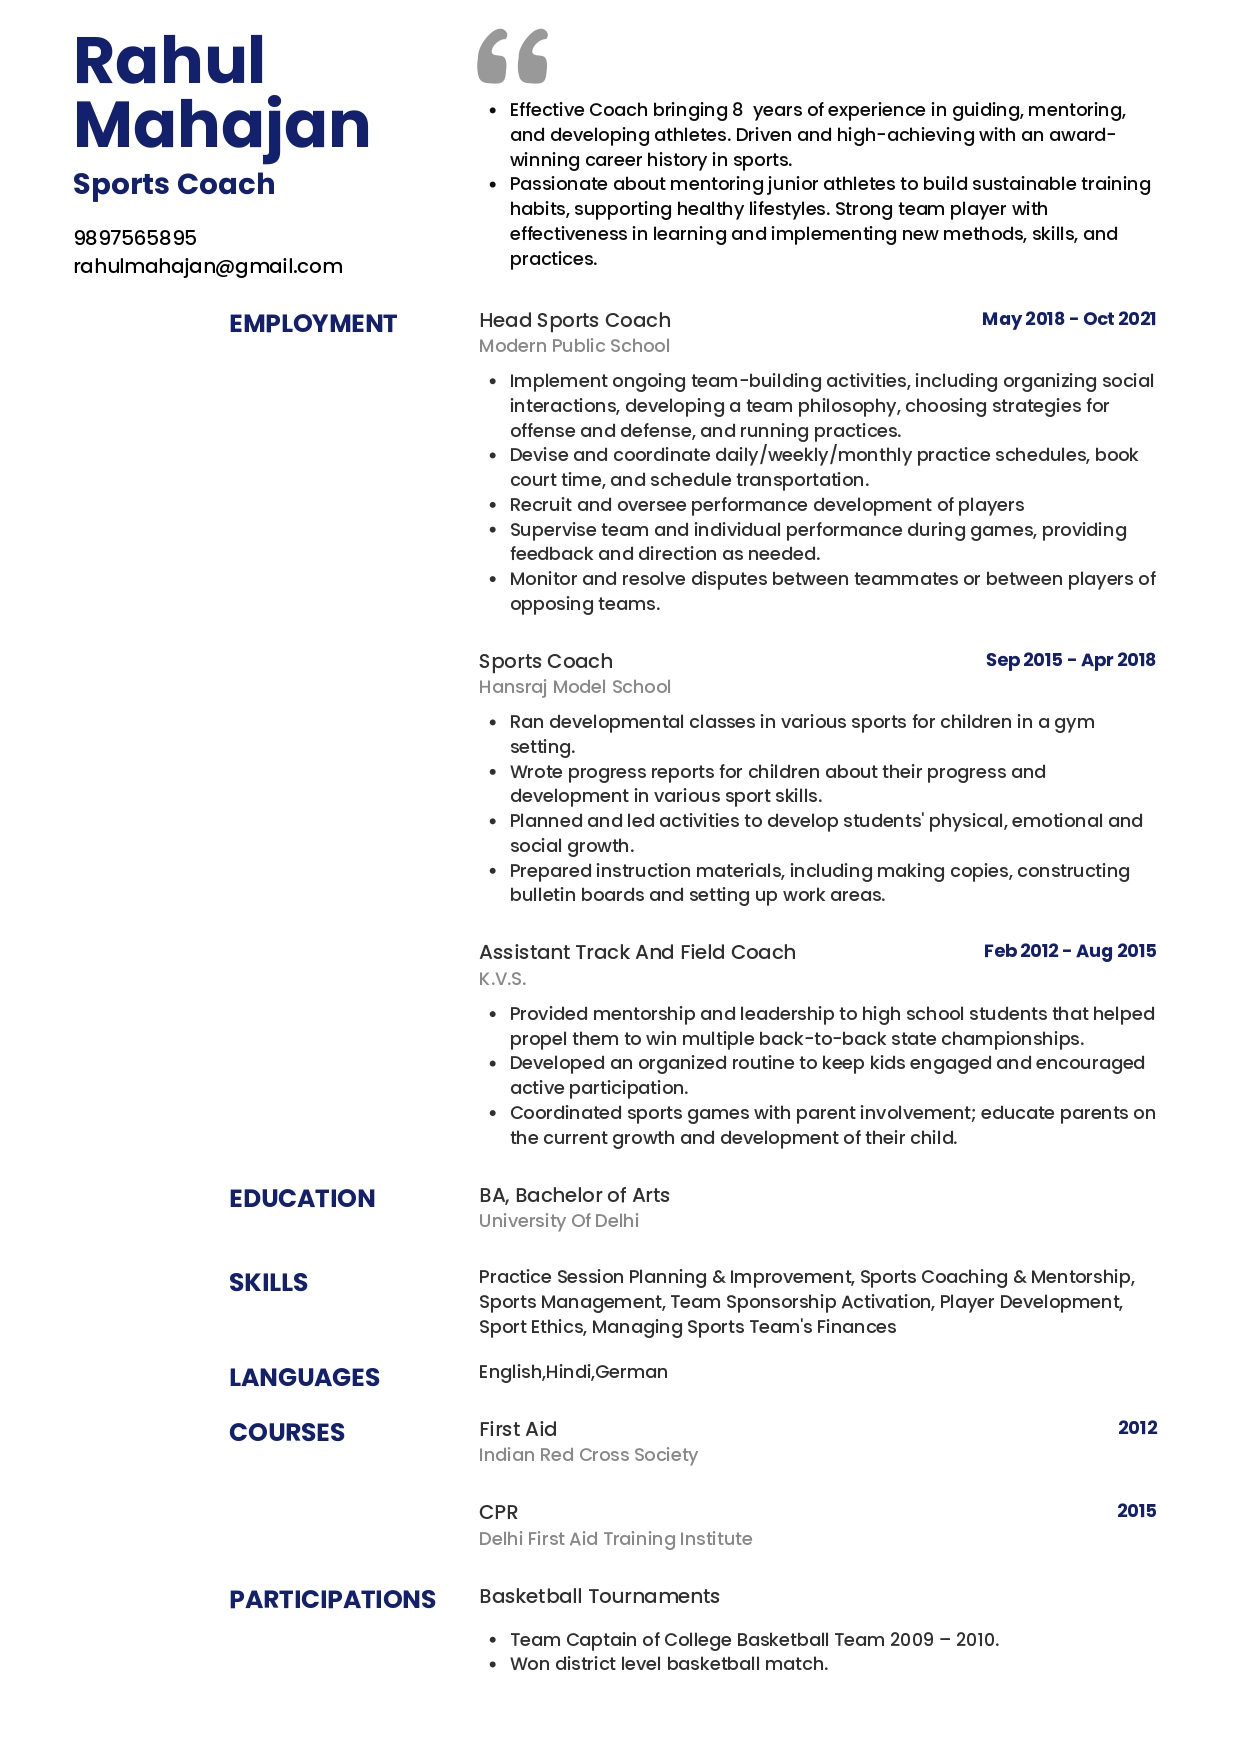 Sample Resume of Sports Coach | Free Resume Templates & Samples on Resumod.co